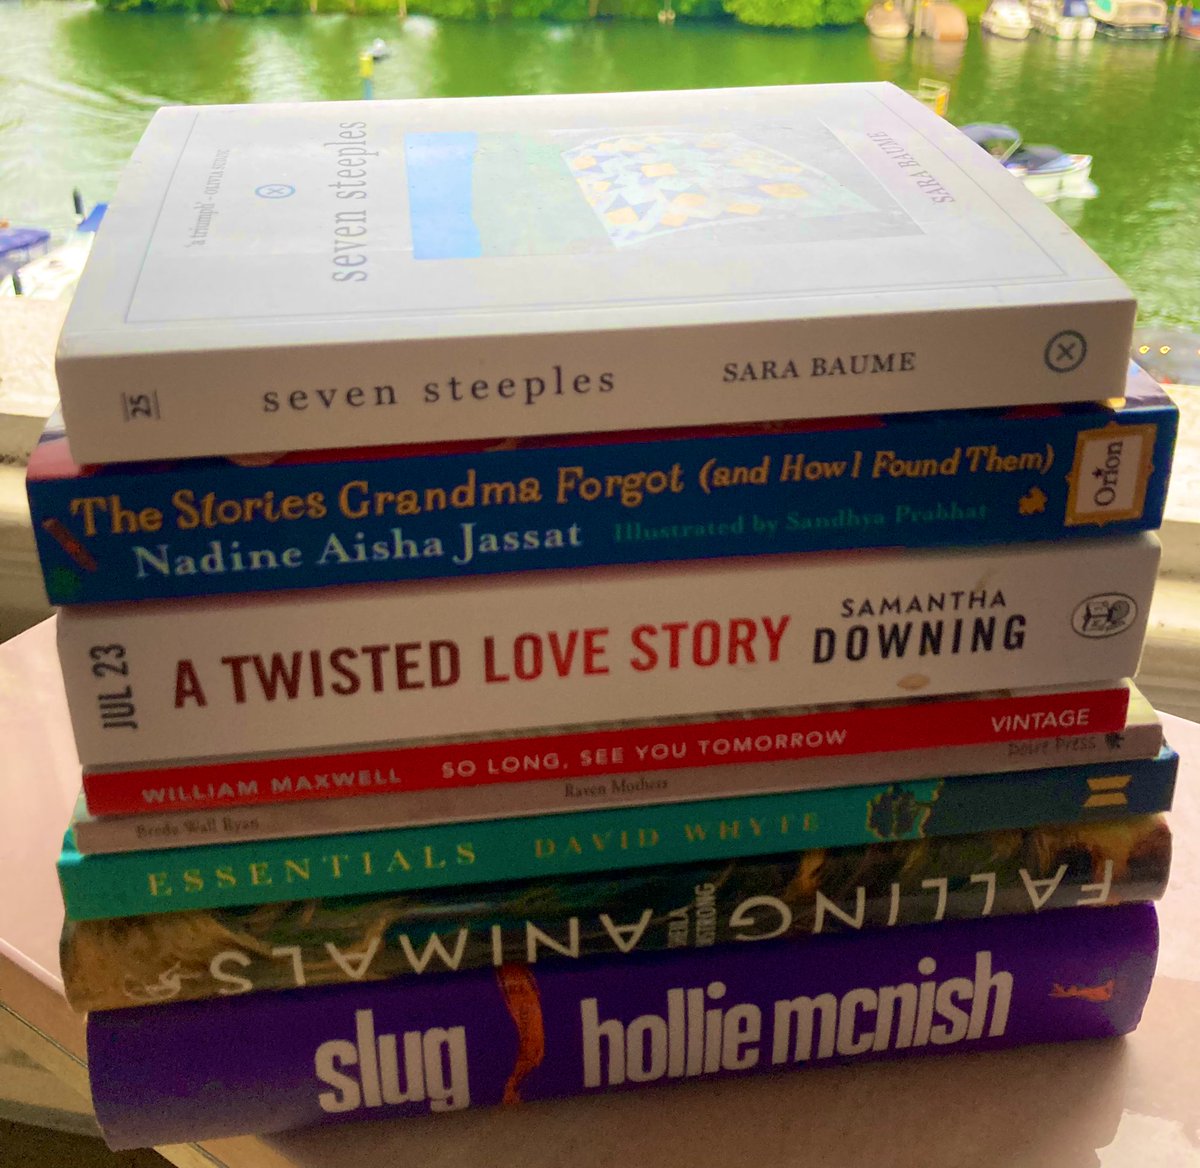 Books I read in June: all bangers! Highlights included #atwistedlovestory (out this month), #solongseeyoutomorrow (recommended on here but can’t remember who by!), #fallinganimals @Sheela_no_gig, #sevensteeples and #thestoriesgrandmaforgot